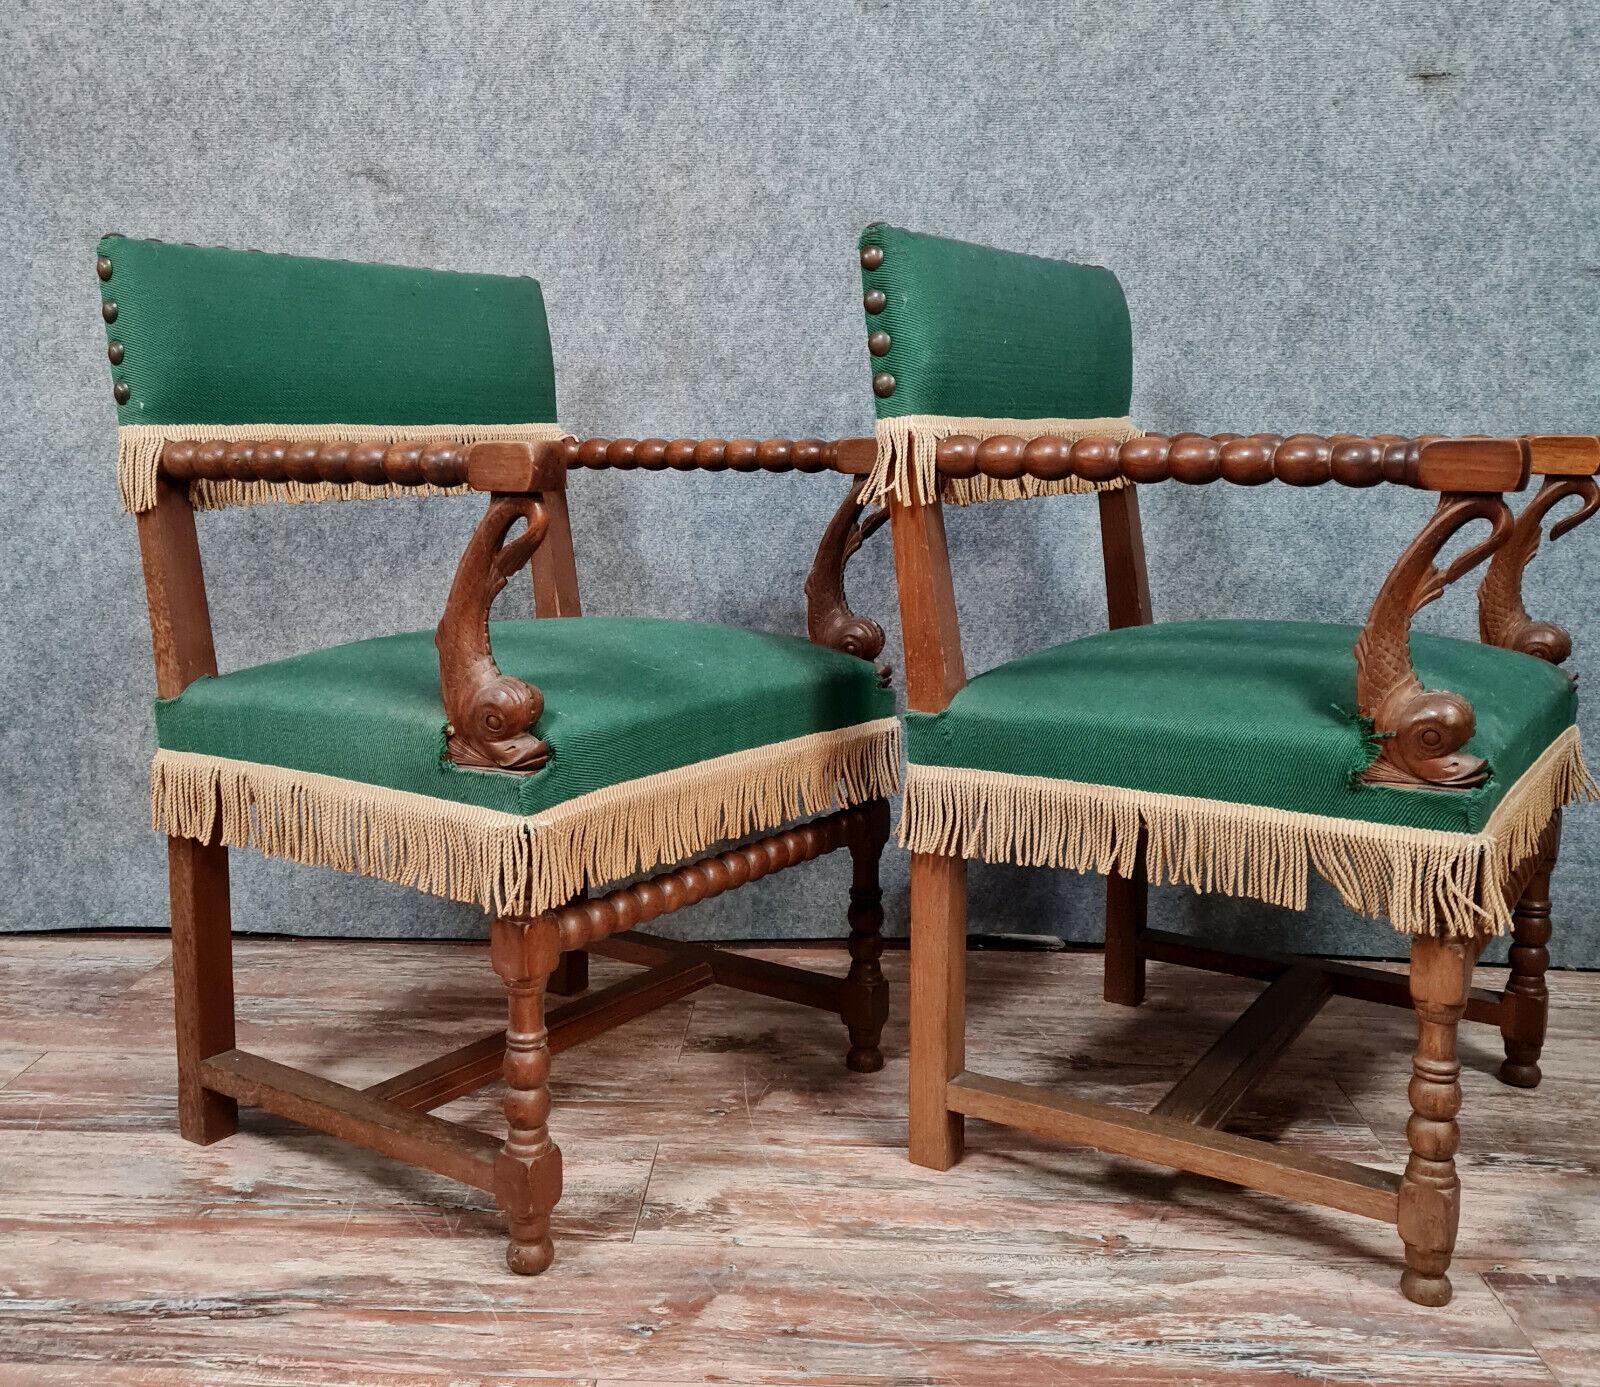 Exquisite Pair of Solid Oak Louis XIII Armchairs from circa 1850s -1X11 For Sale 2